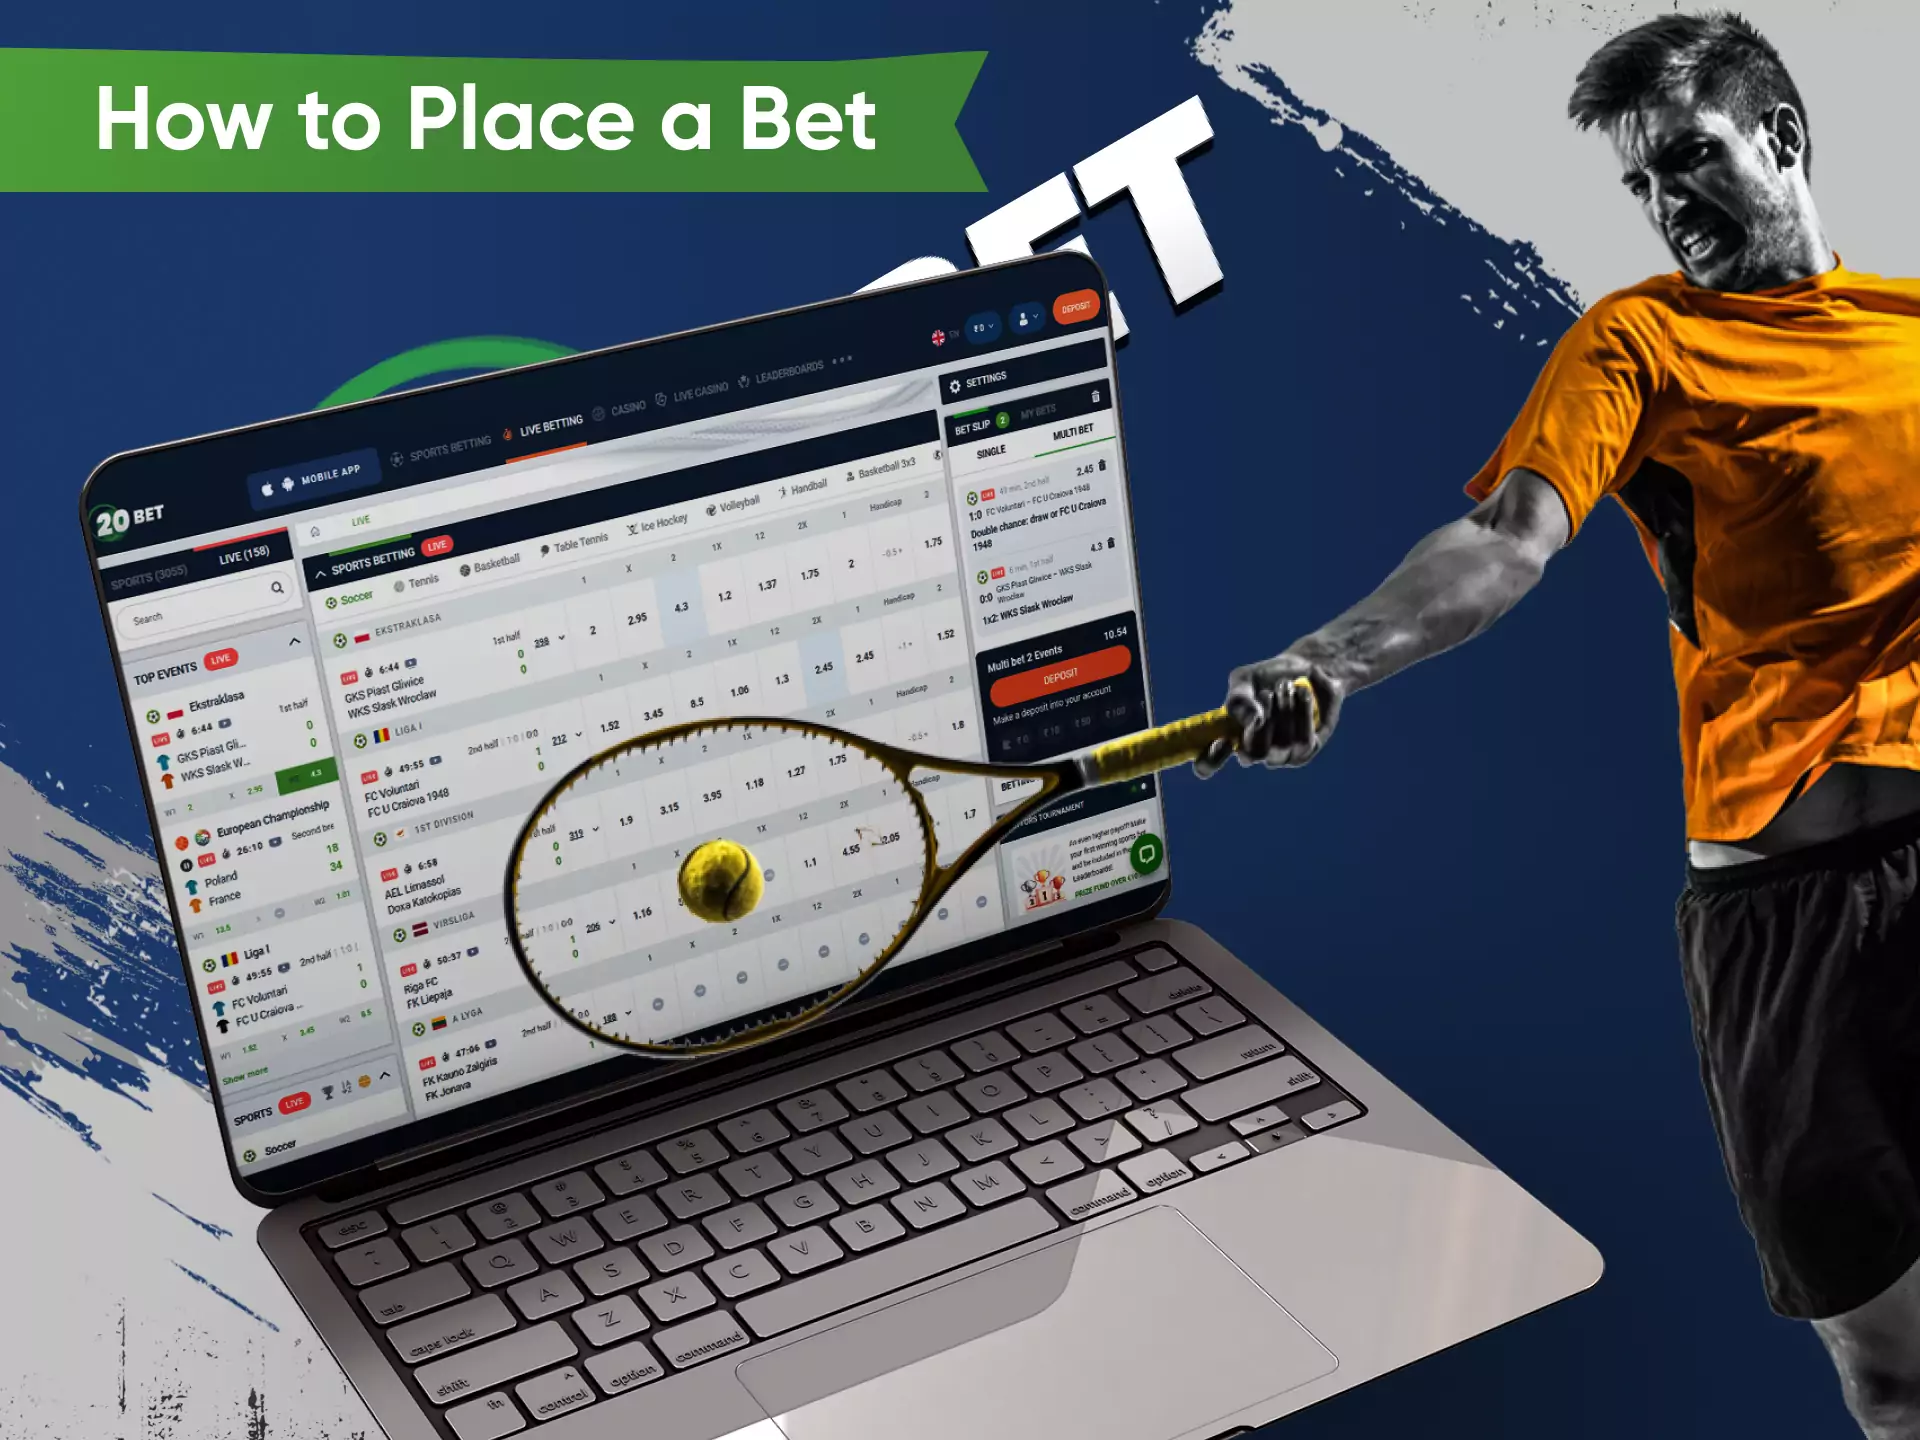 Choose a match and make a prediction to place a bet on 20bet.